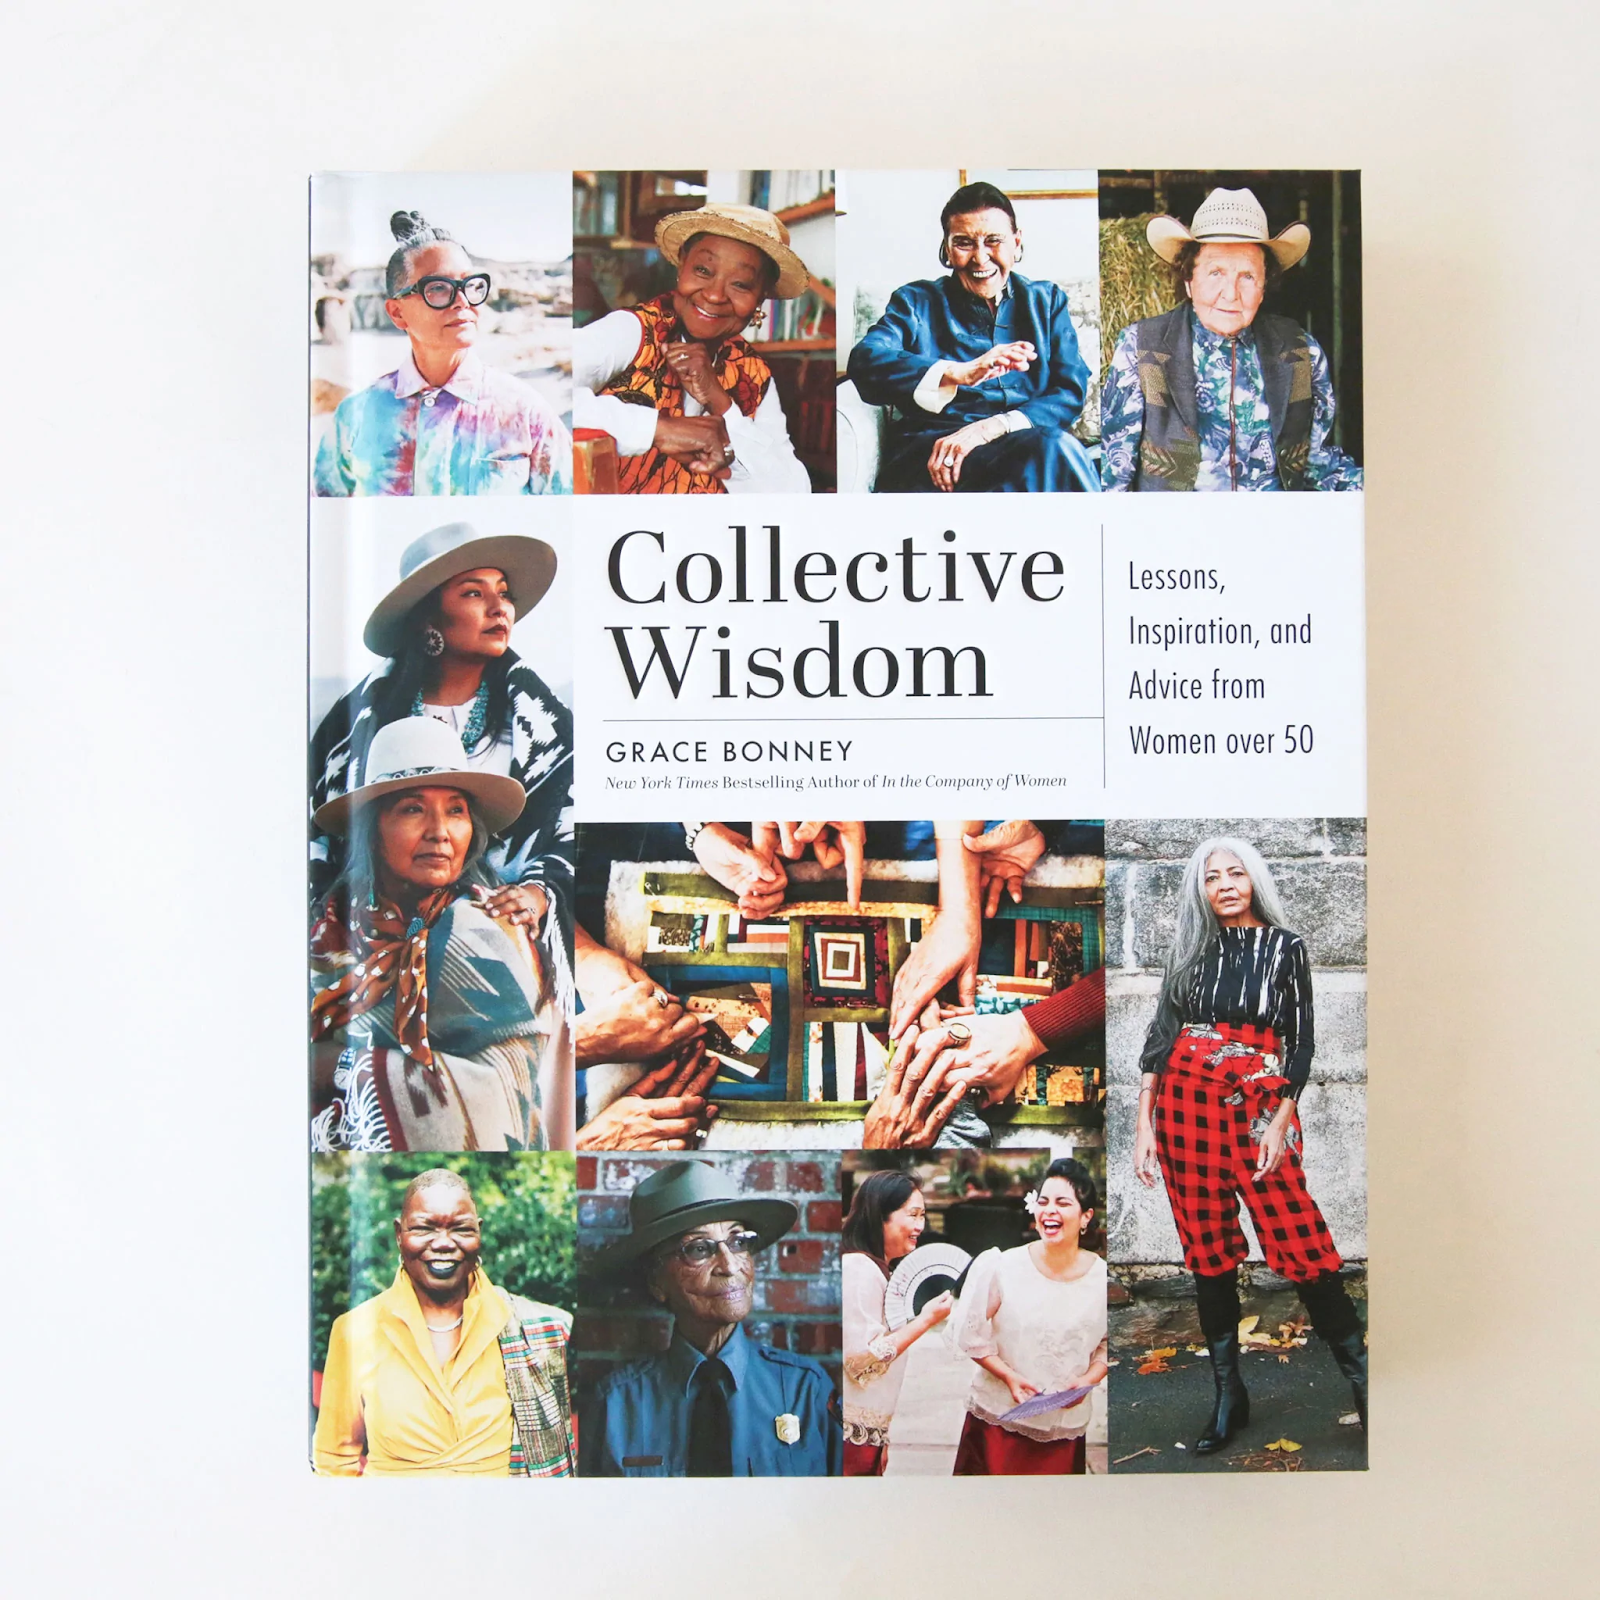 image of a book called "collective wisdom" by grace bonney, subtitled "Lessons, inspiration, and advice from women over 50" with images of various older women of different backgrounds and cultures